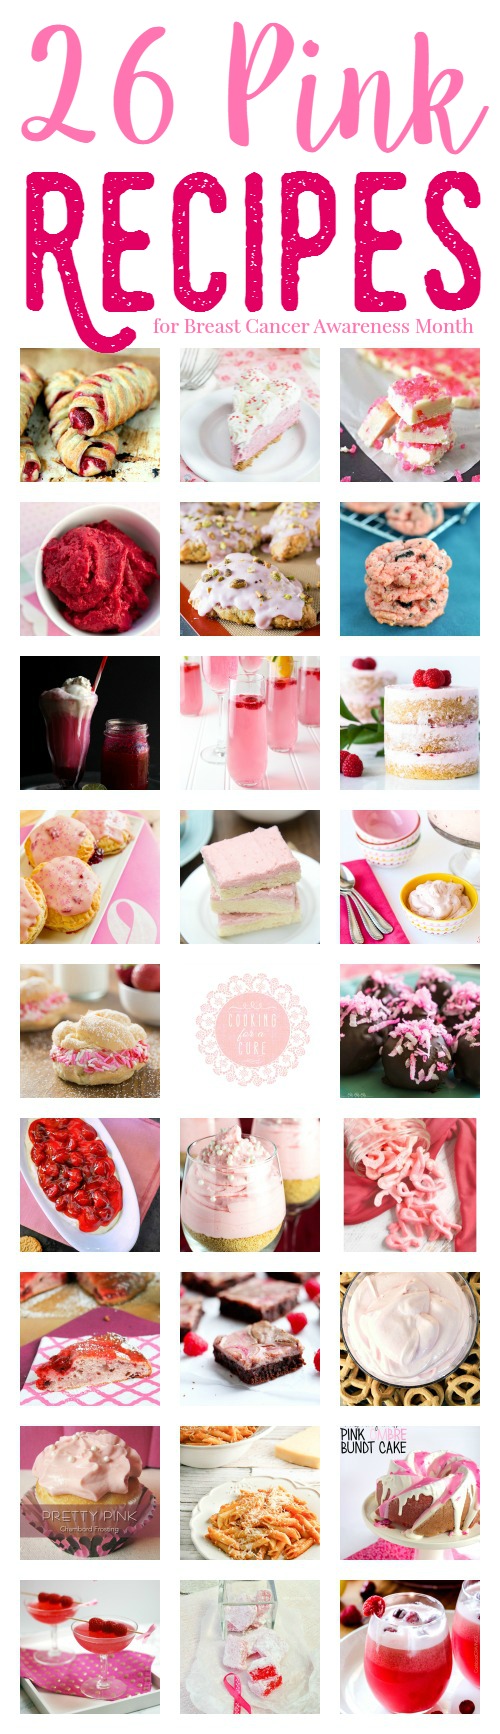 26 Pink Recipes for Breast Cancer Awareness 